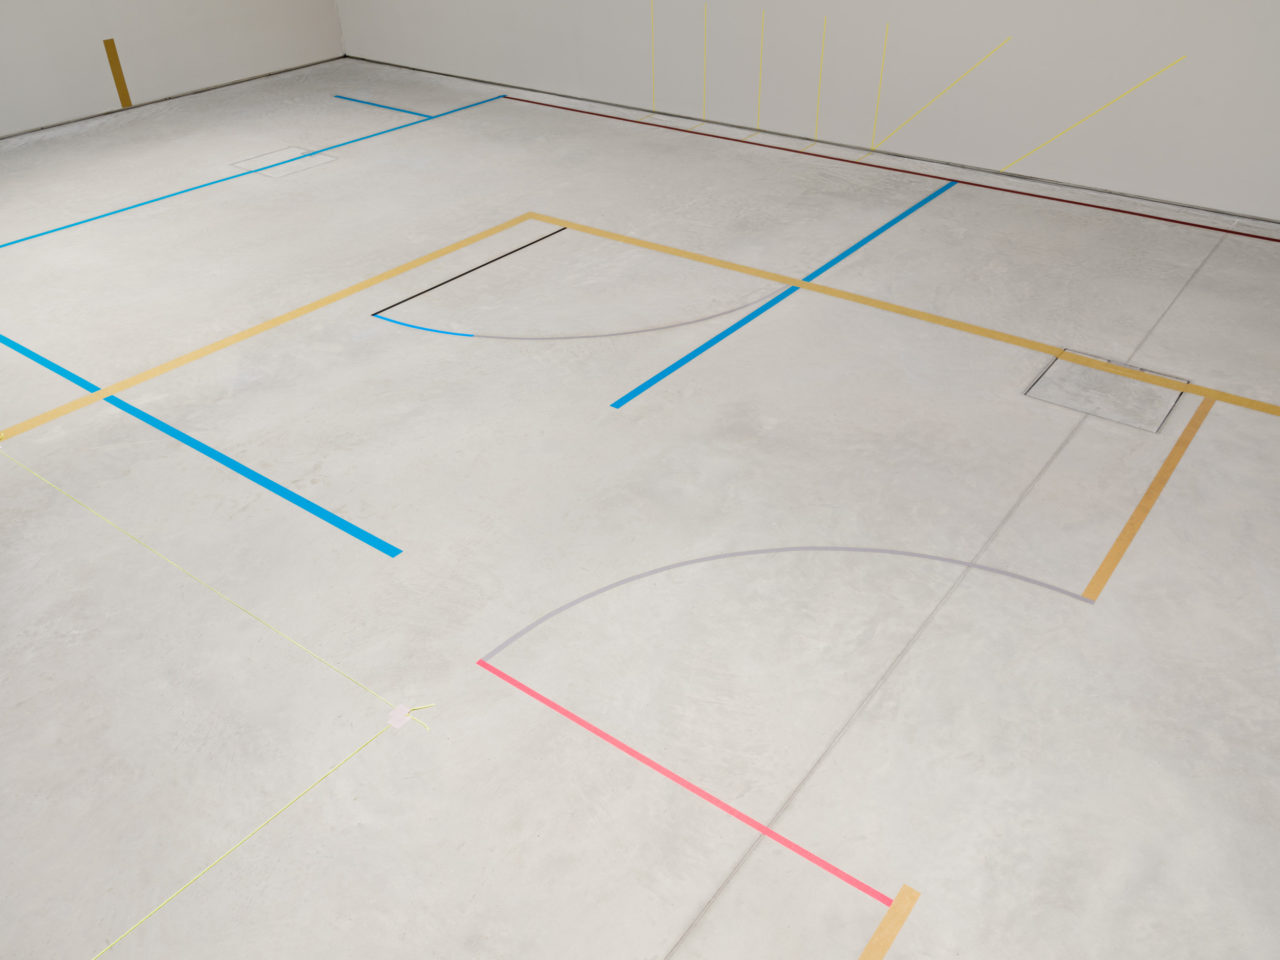 Colourful lines on a grey floor in a gallery space.